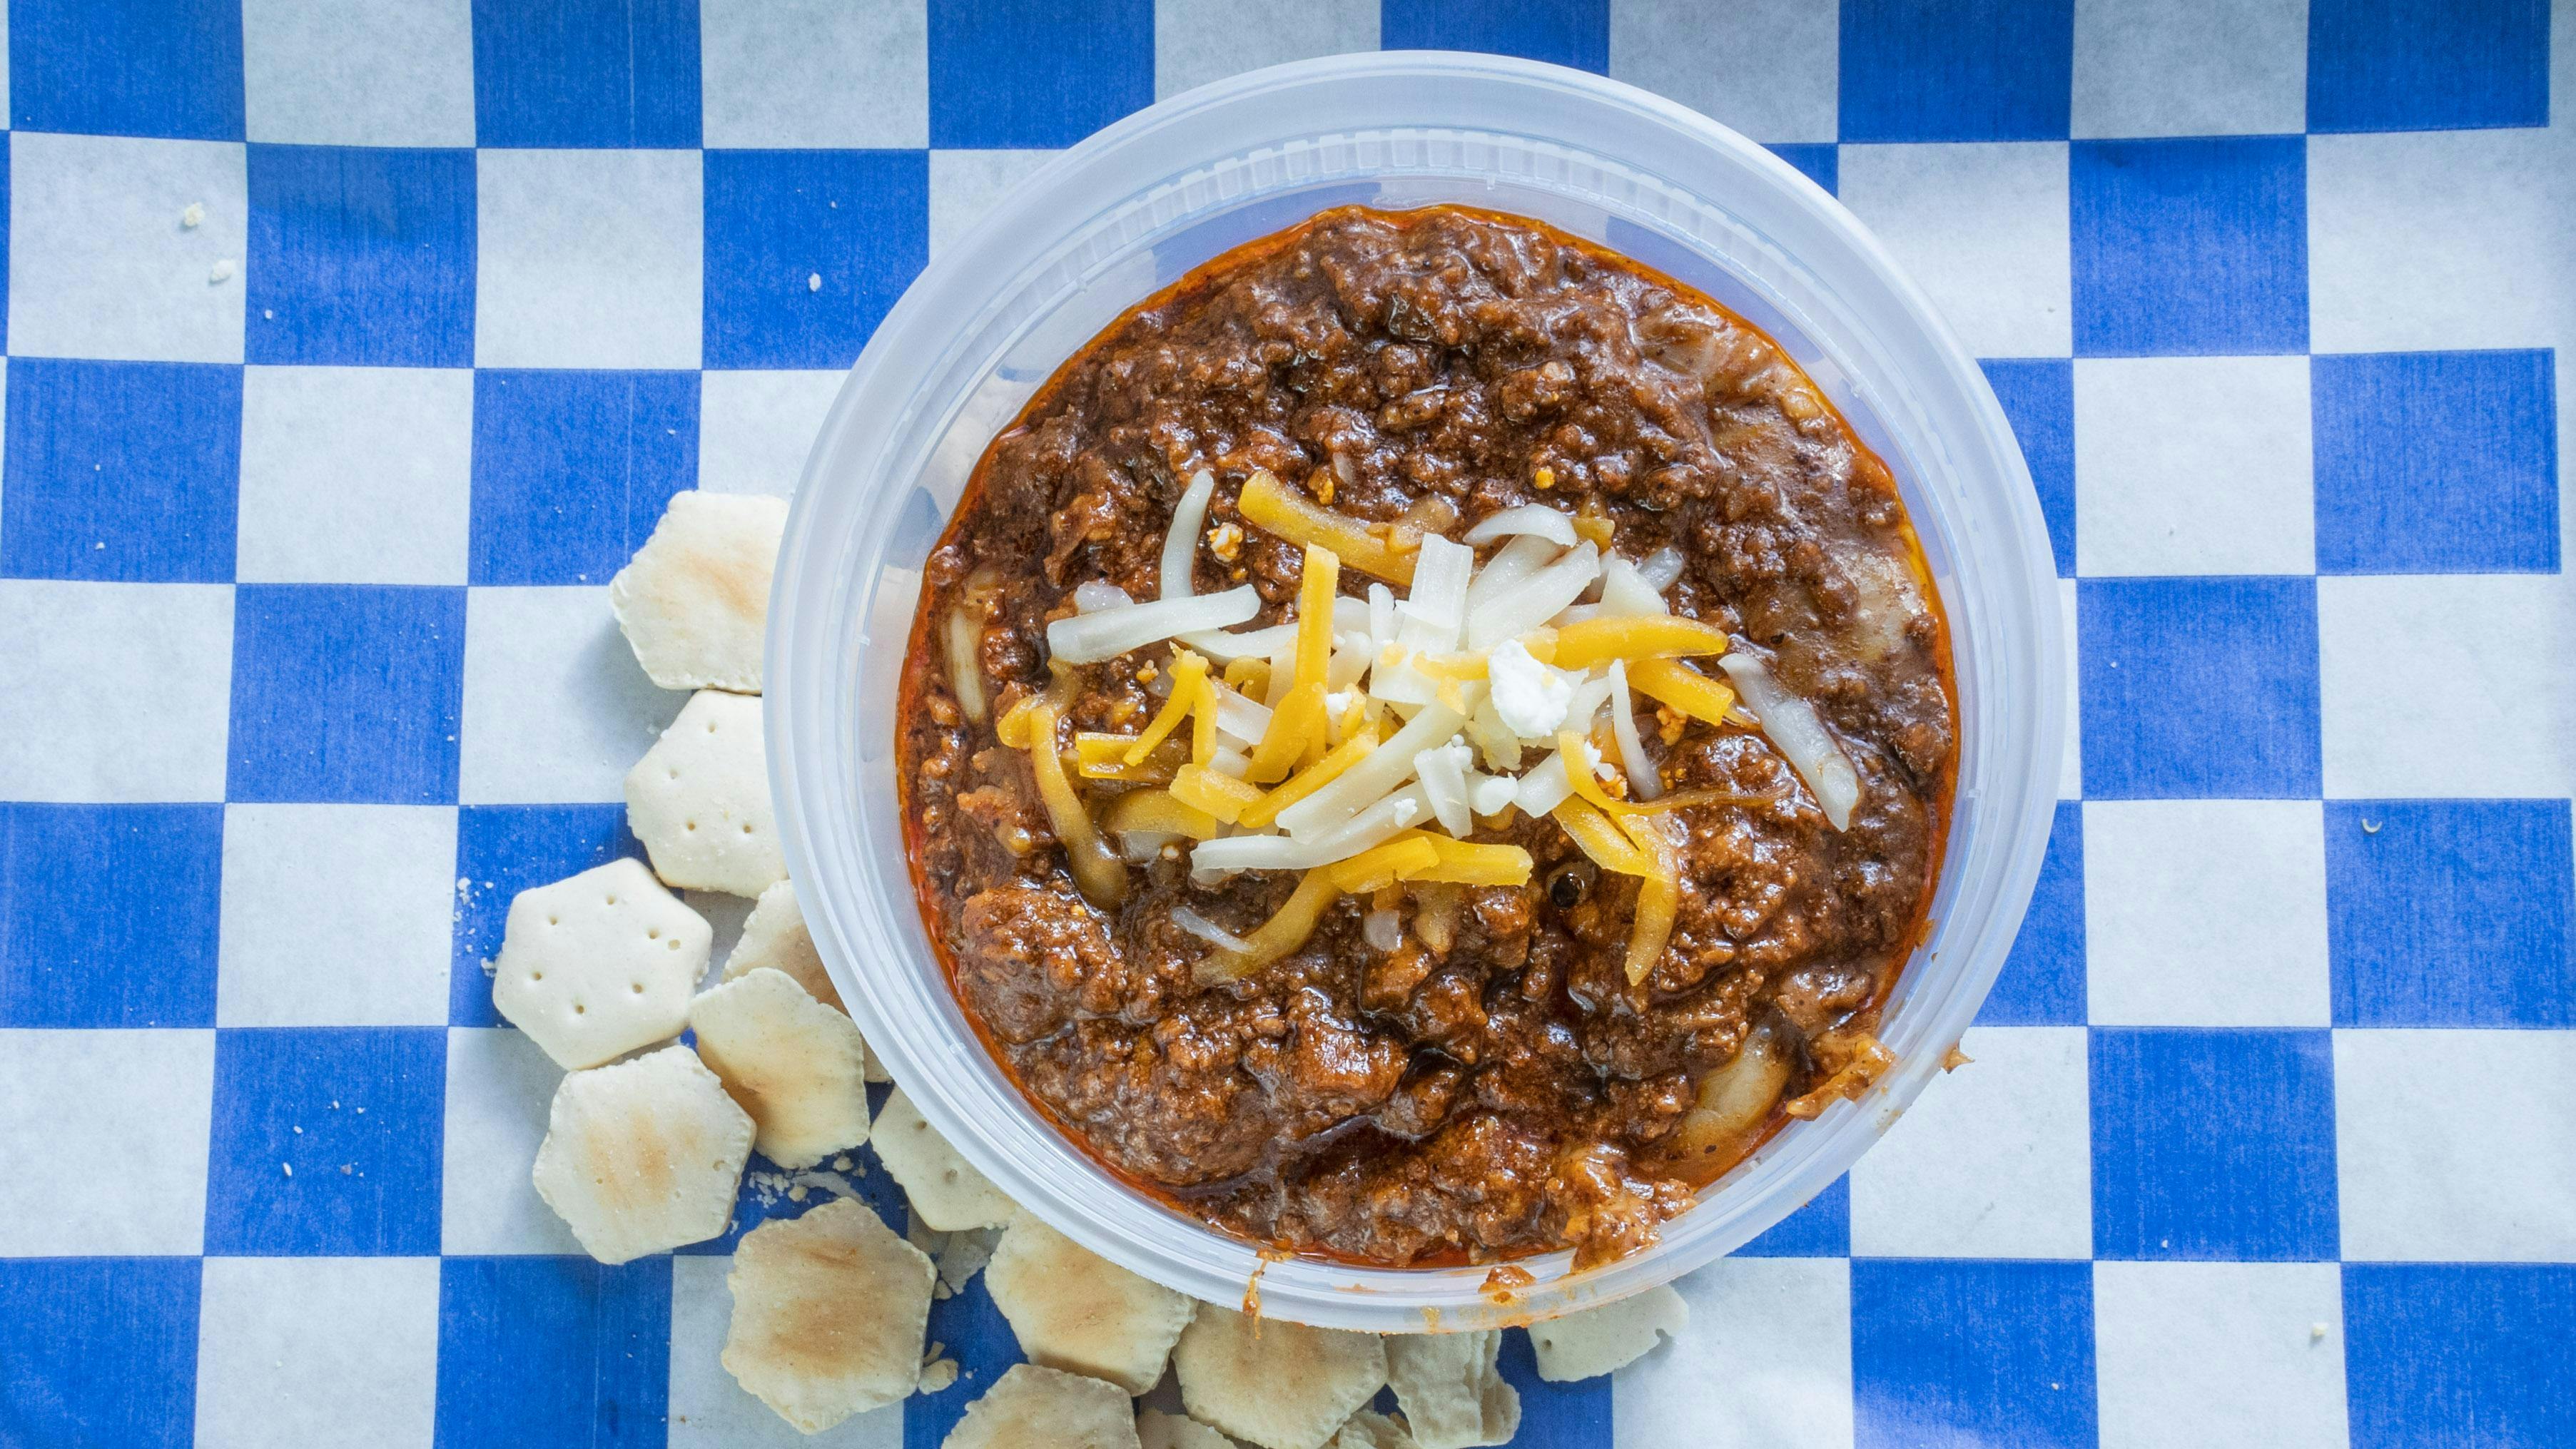 Chili and Crackers from Austin Chicken Nugget  - Research Blvd in Austin, TX